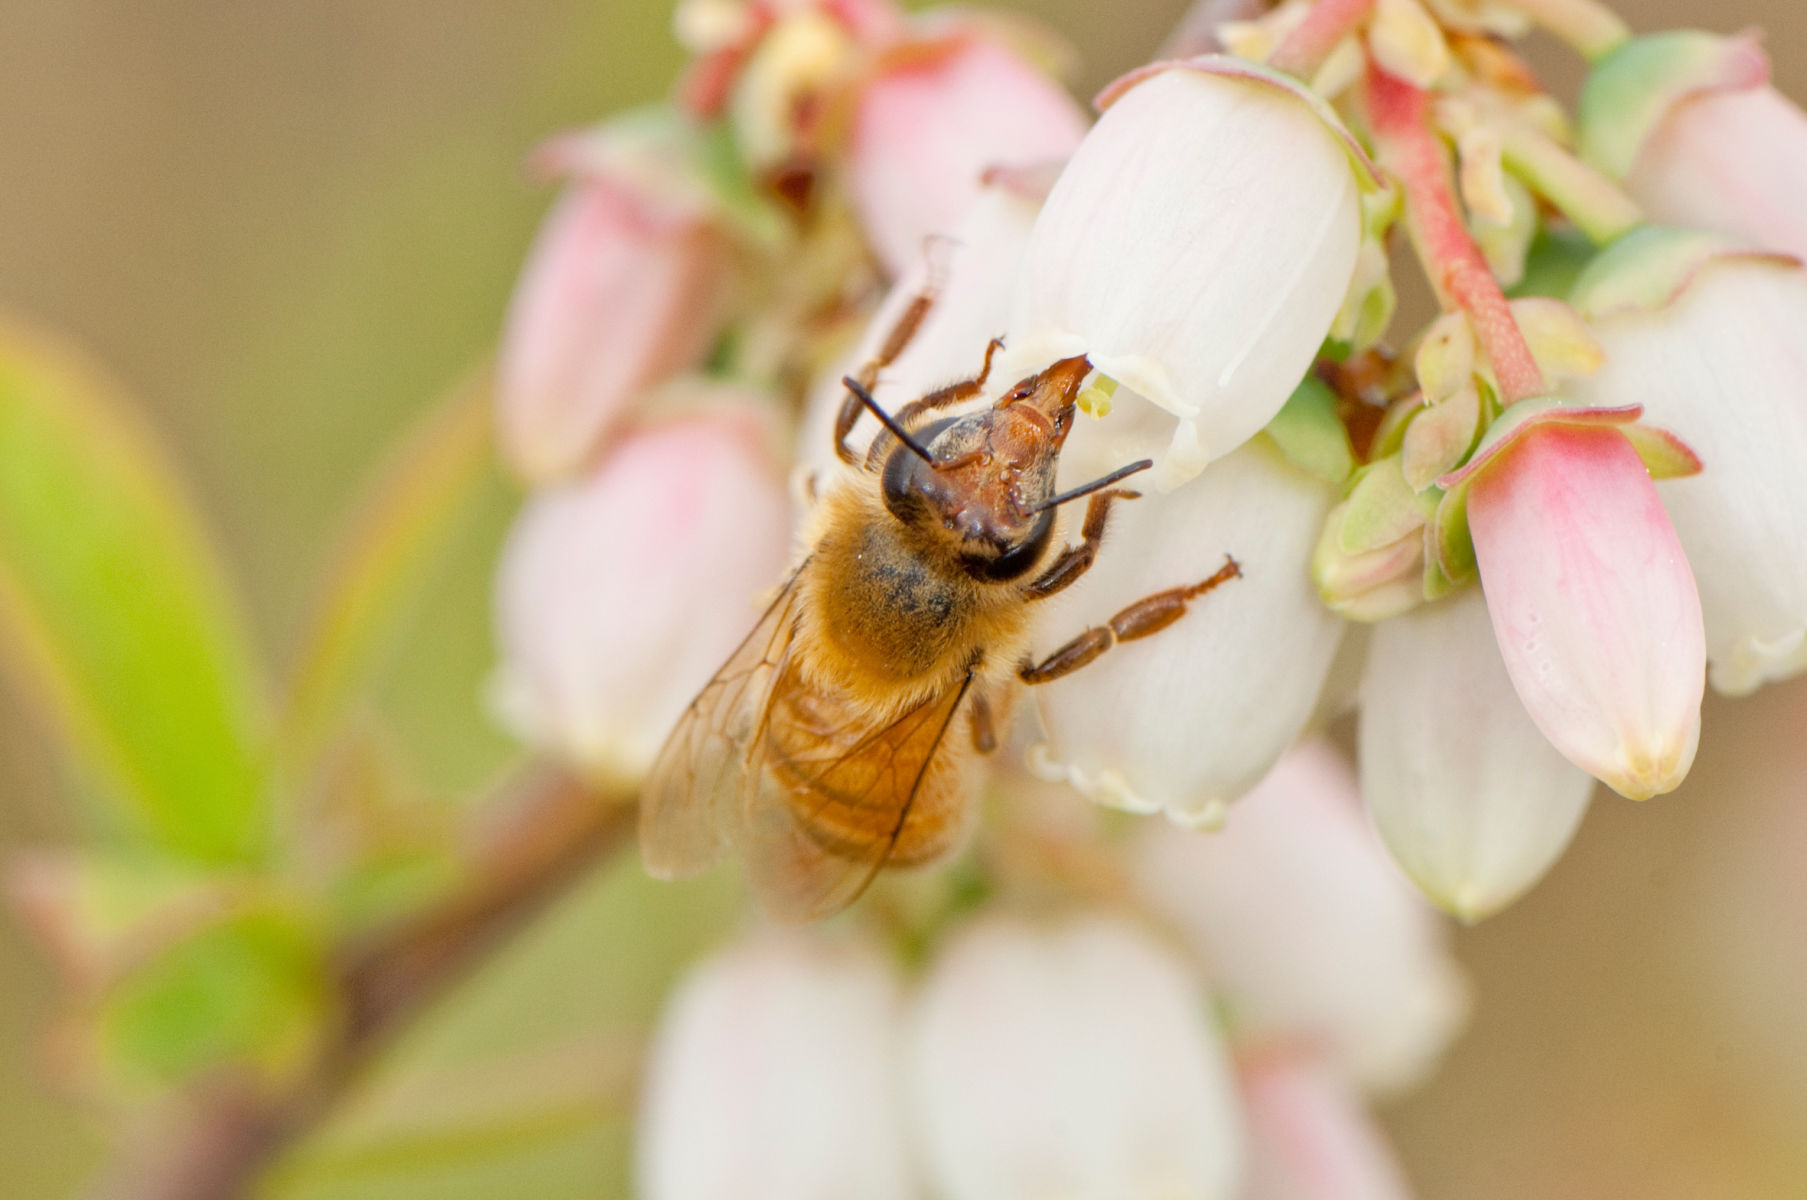 Protective covers reduce honey bee foraging and colony strength